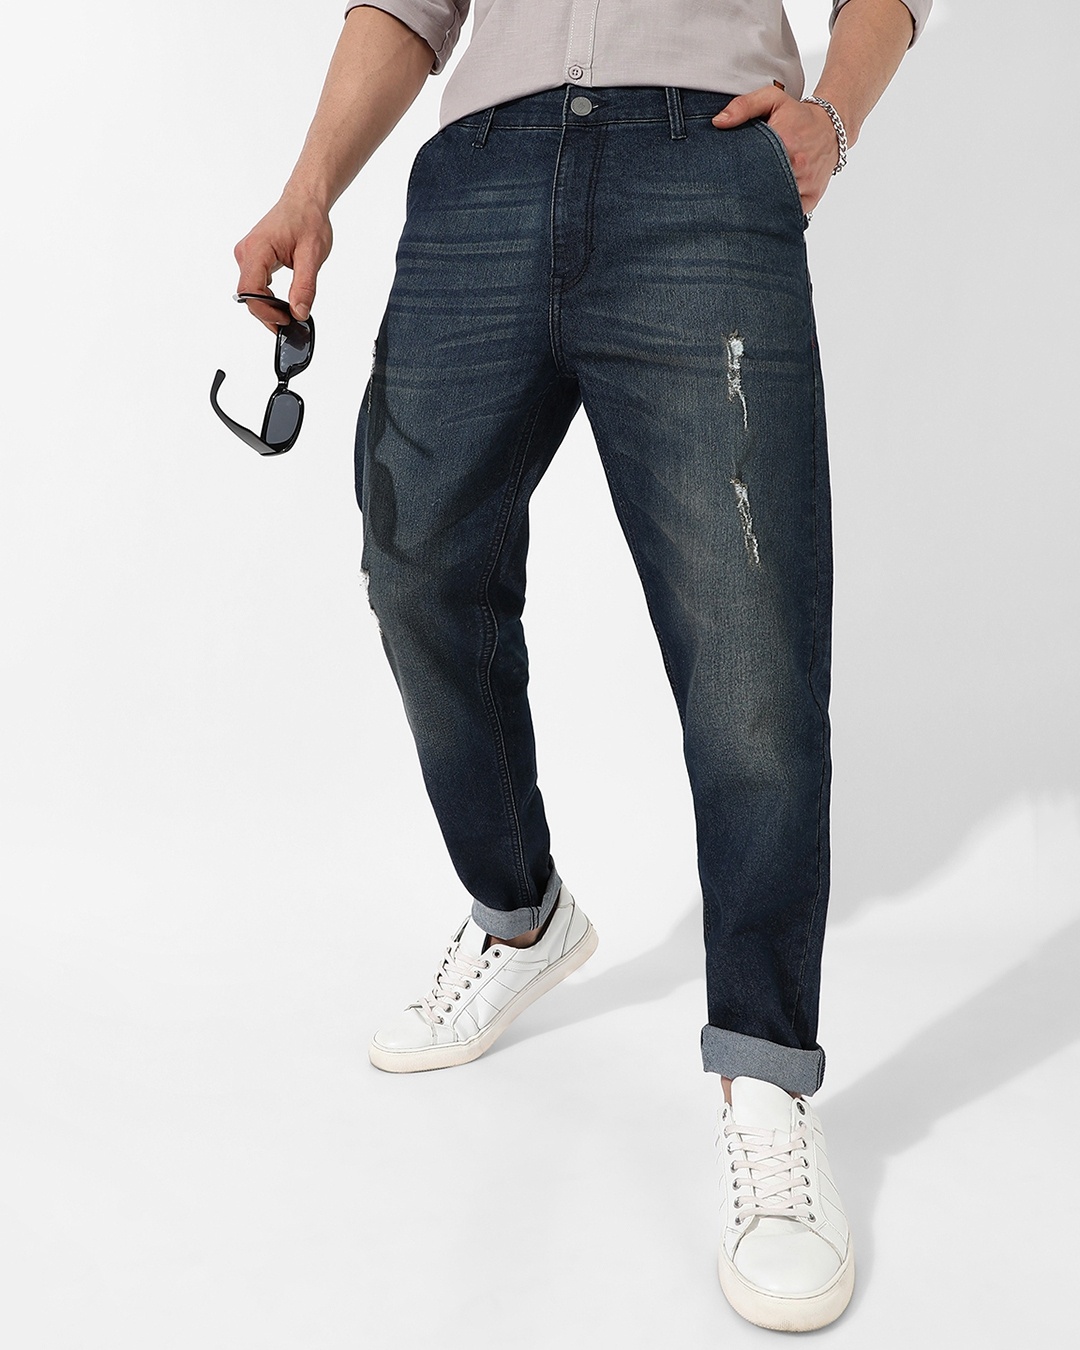 Men's Blue Washed Distressed Jeans 